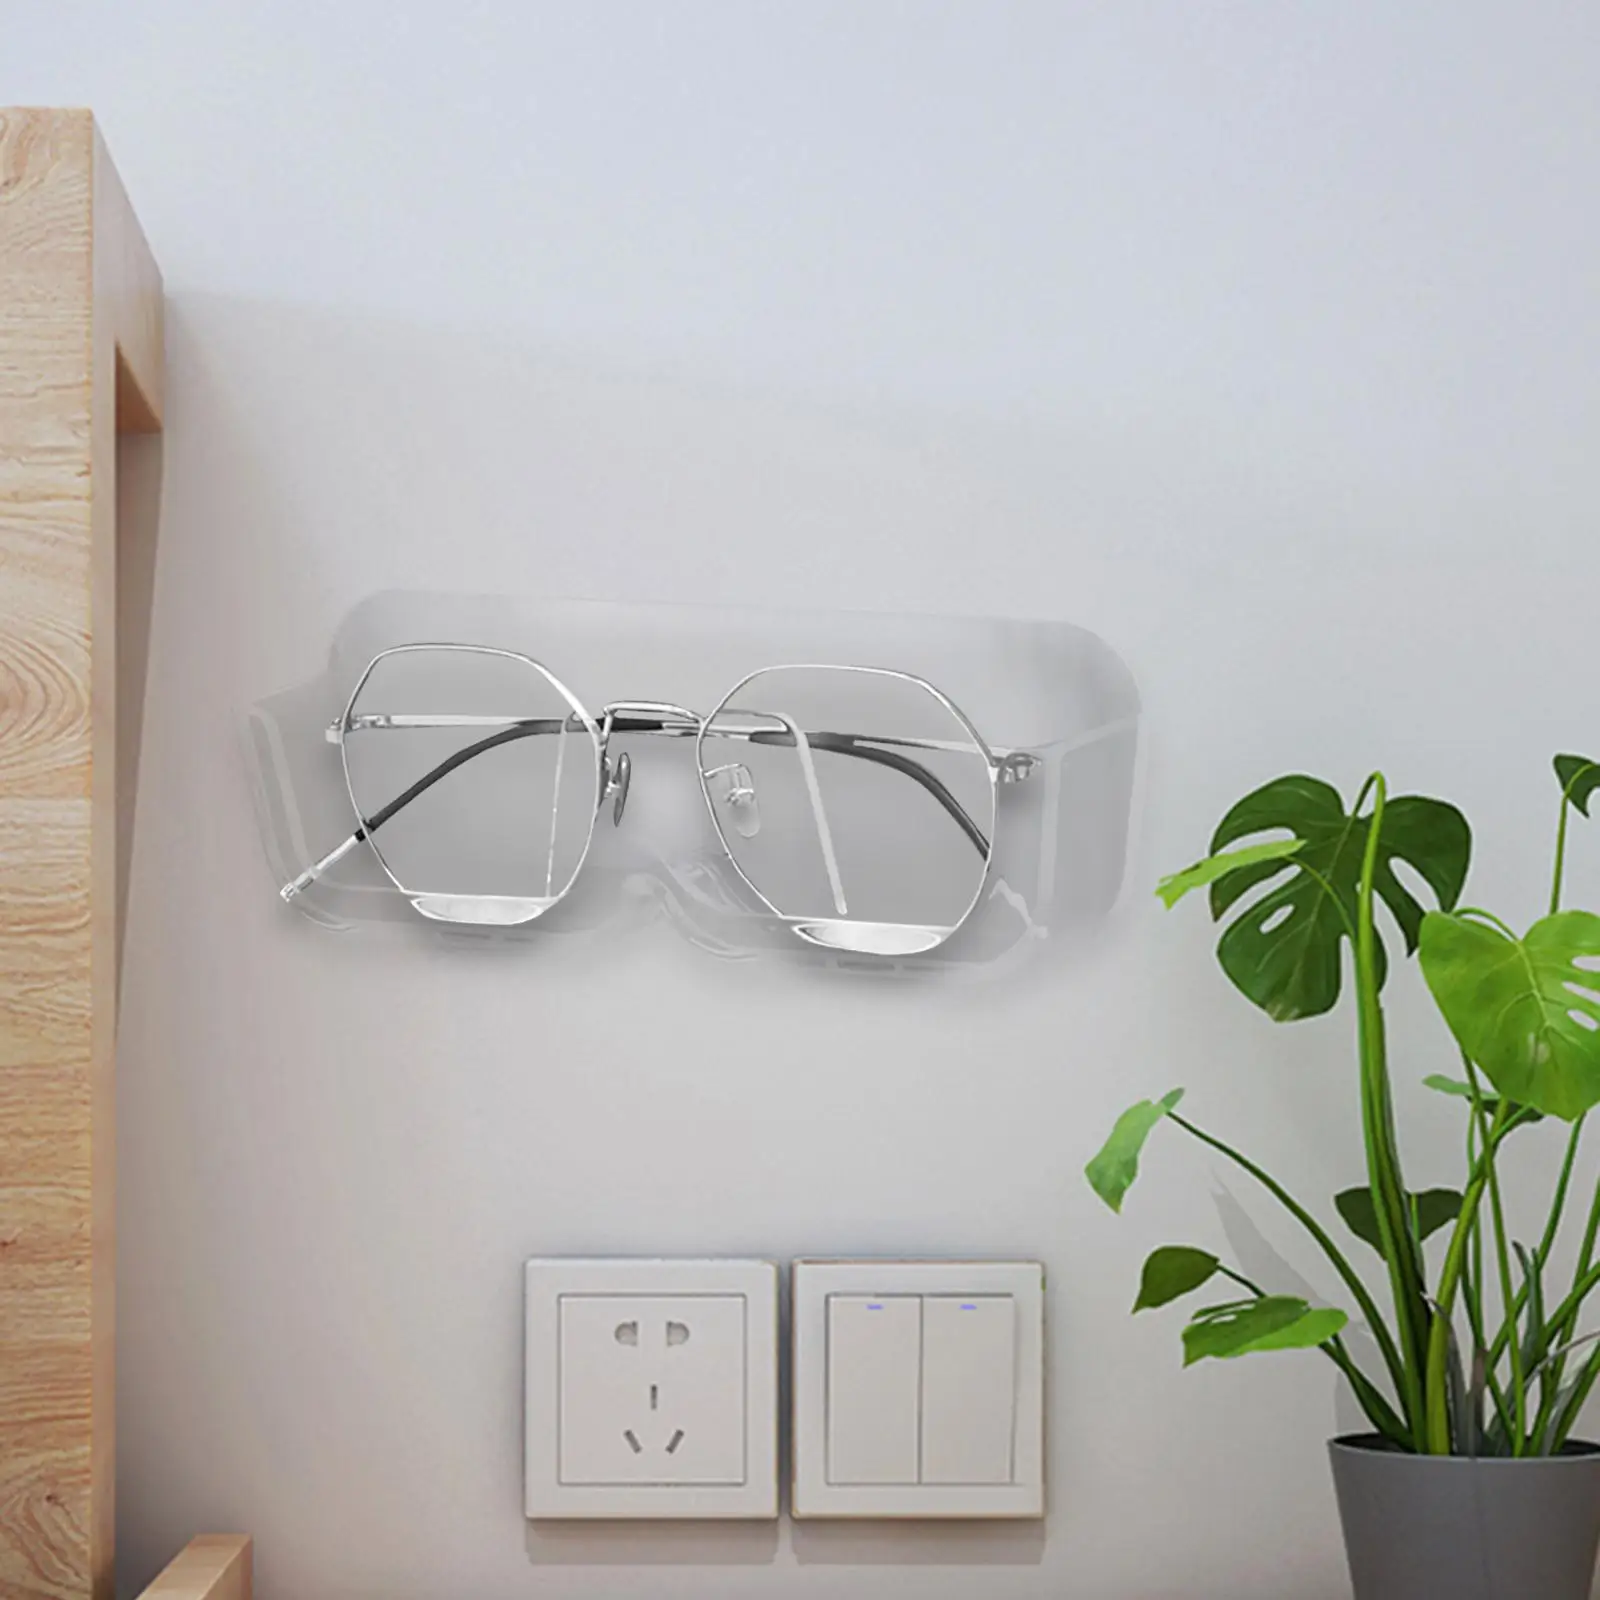 Eyeglasses Holder Stand Wall Mounted Stylish Space Saving Glasses Storage Display Rack for Entry Showcase Home Desktop Store